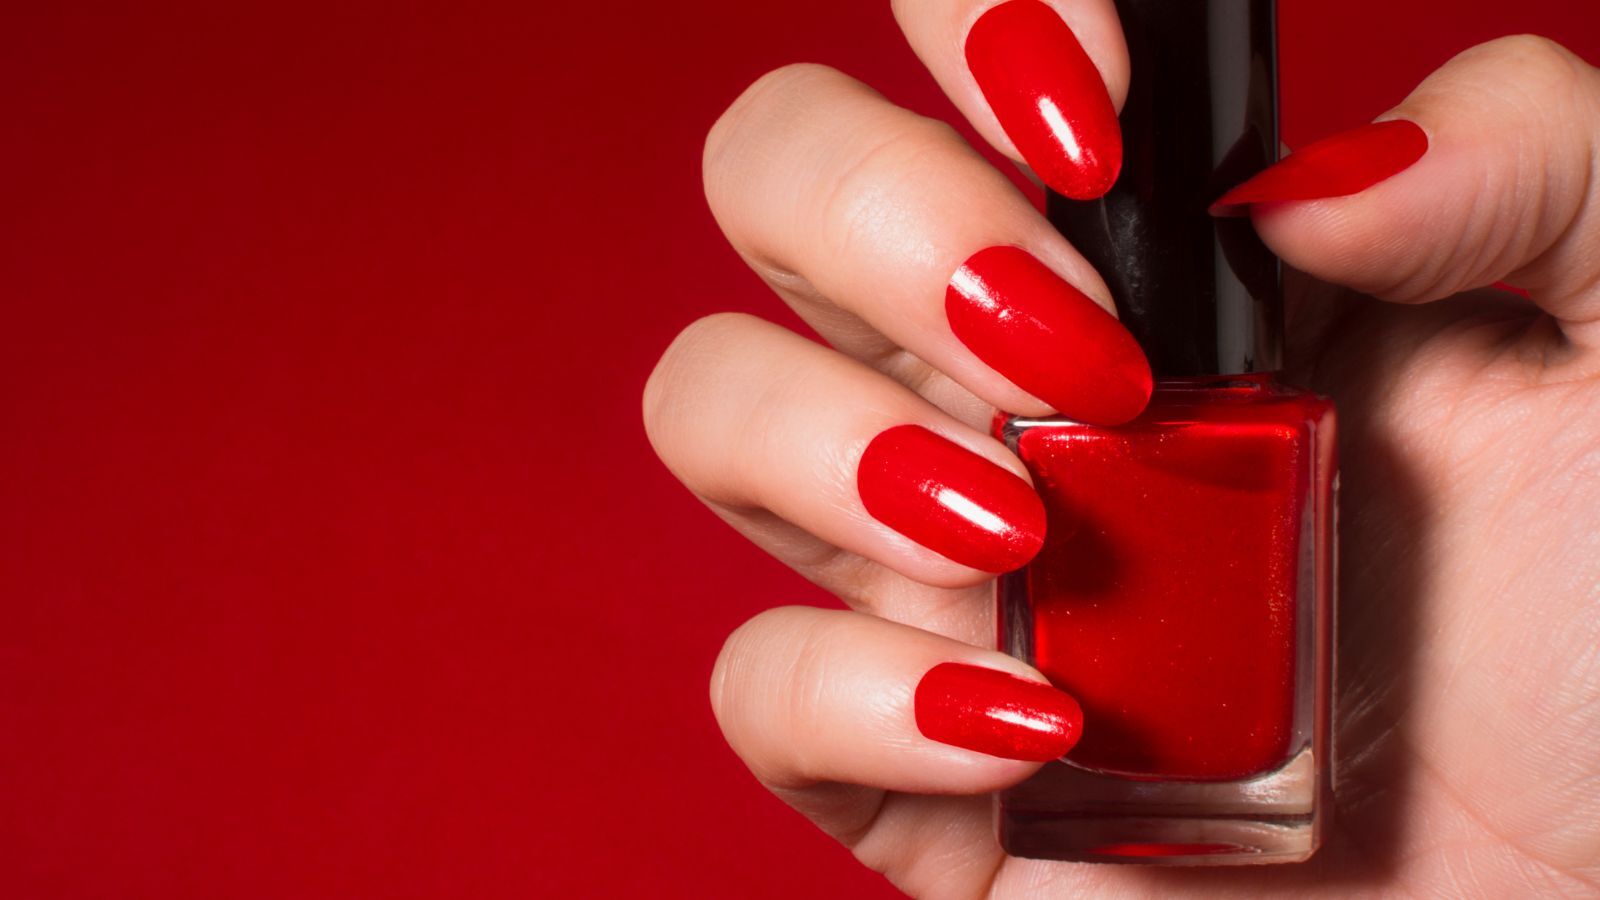 15 Best Nail Polish Brands for DIY Manicures at Home